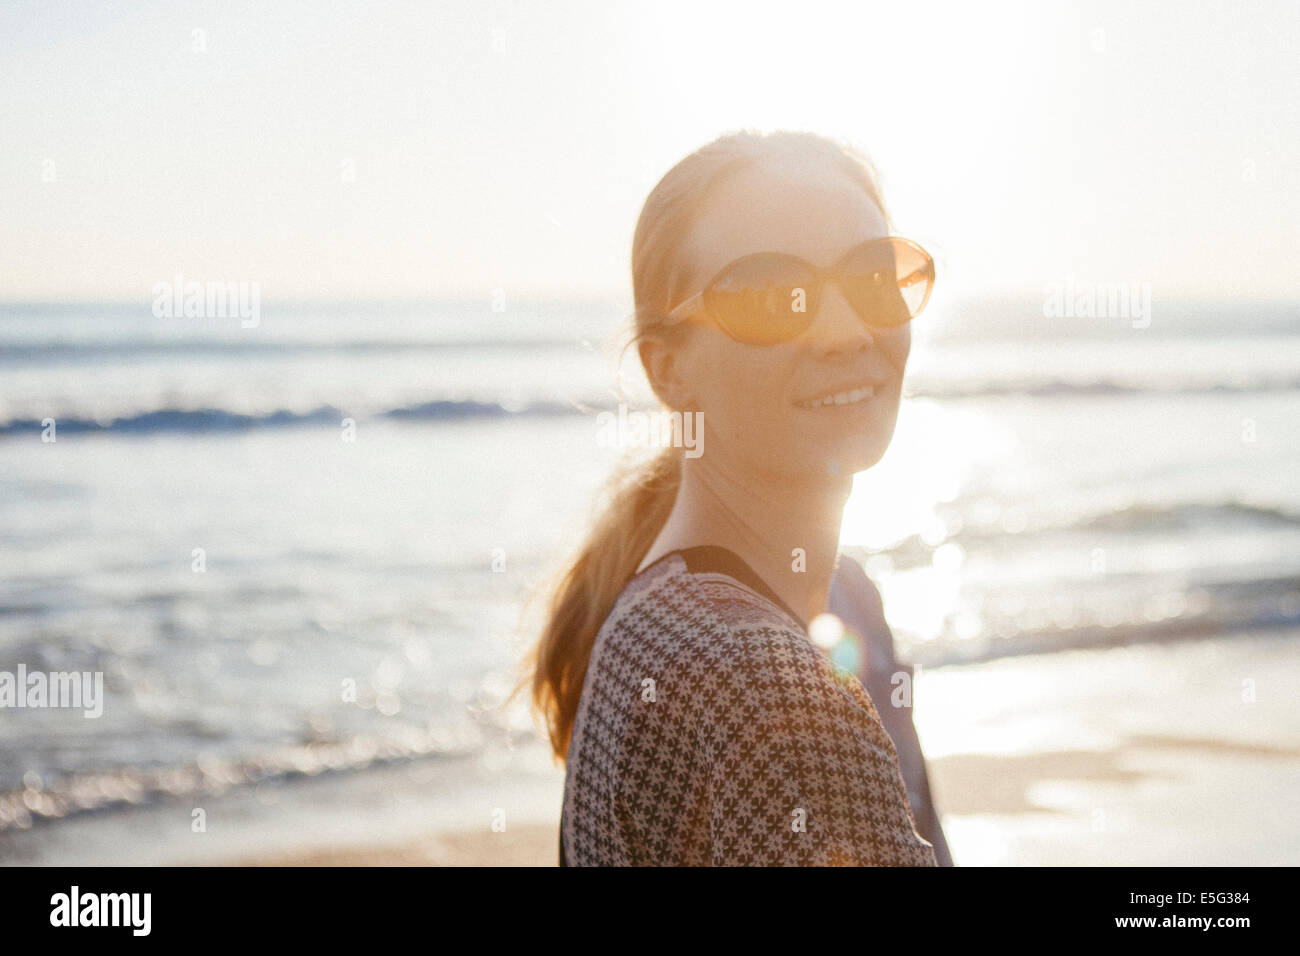 Portrait of woman at beach Stock Photo